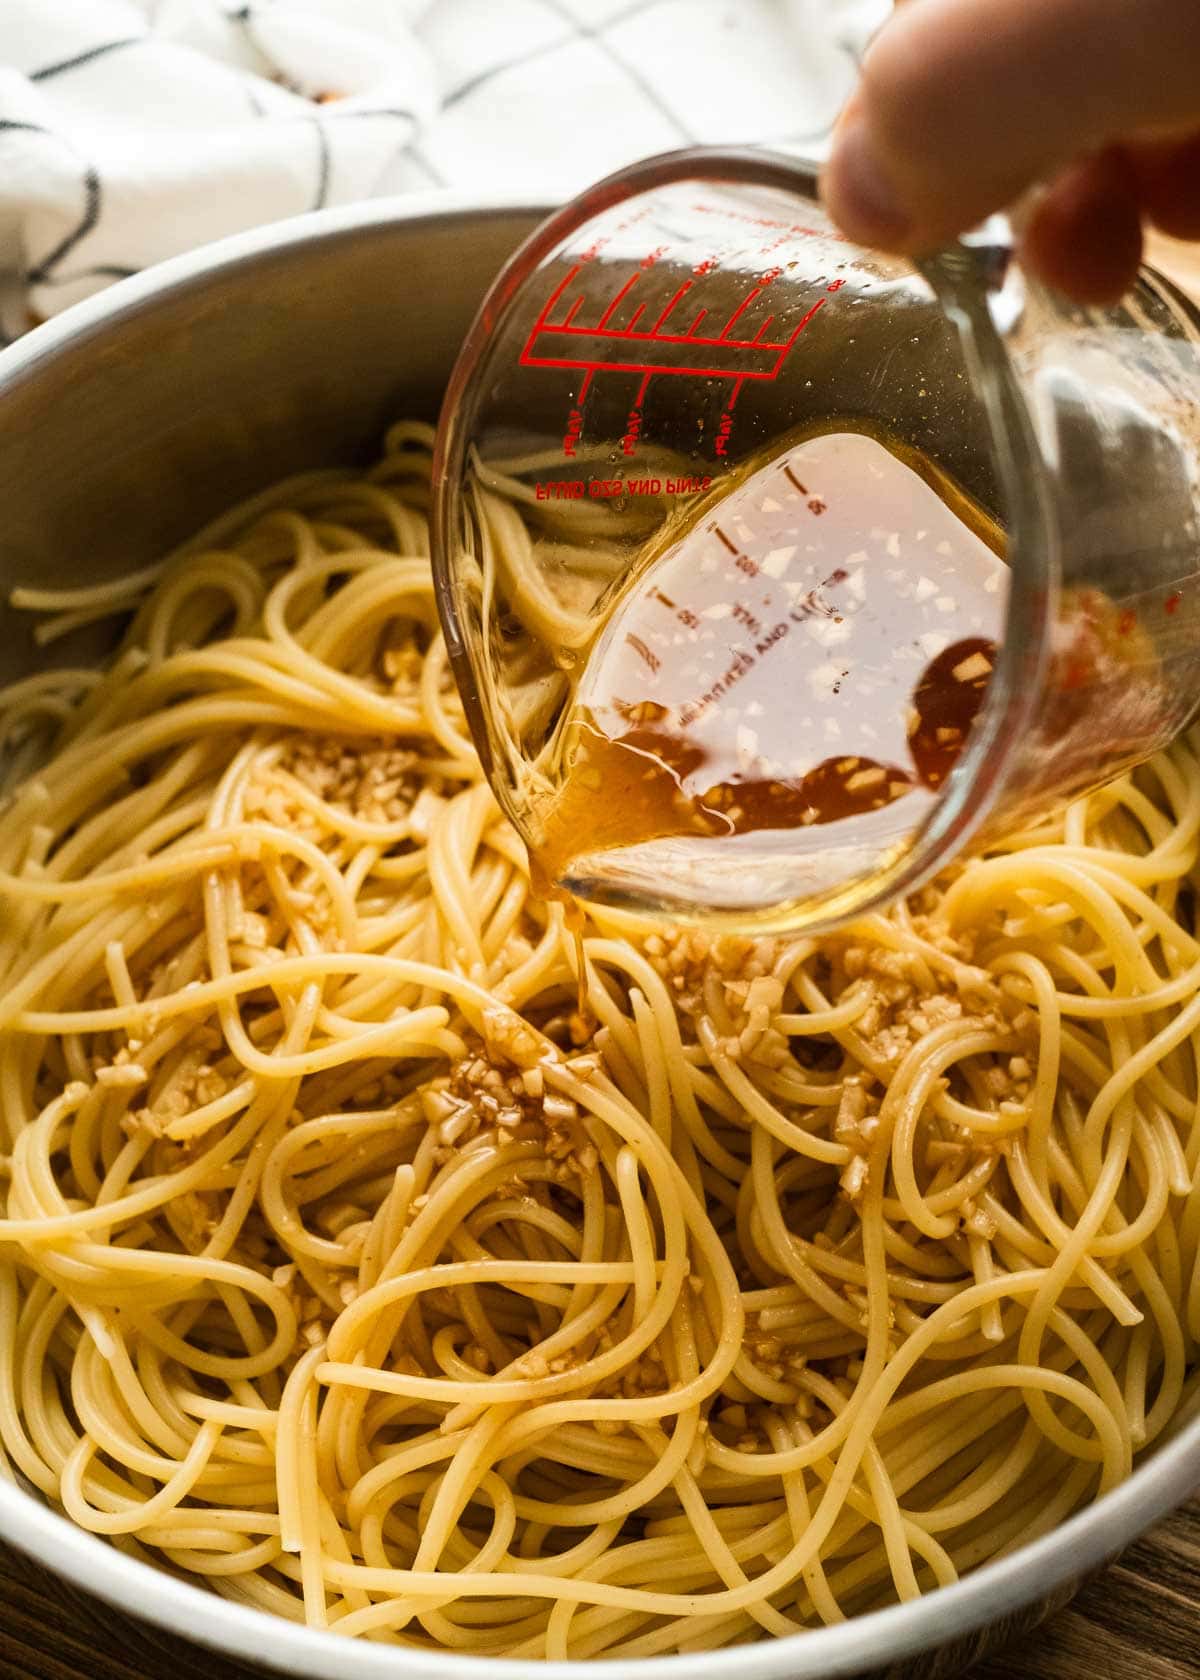 tasty sauce being poured over cooked spaghetti noodles in a bowl